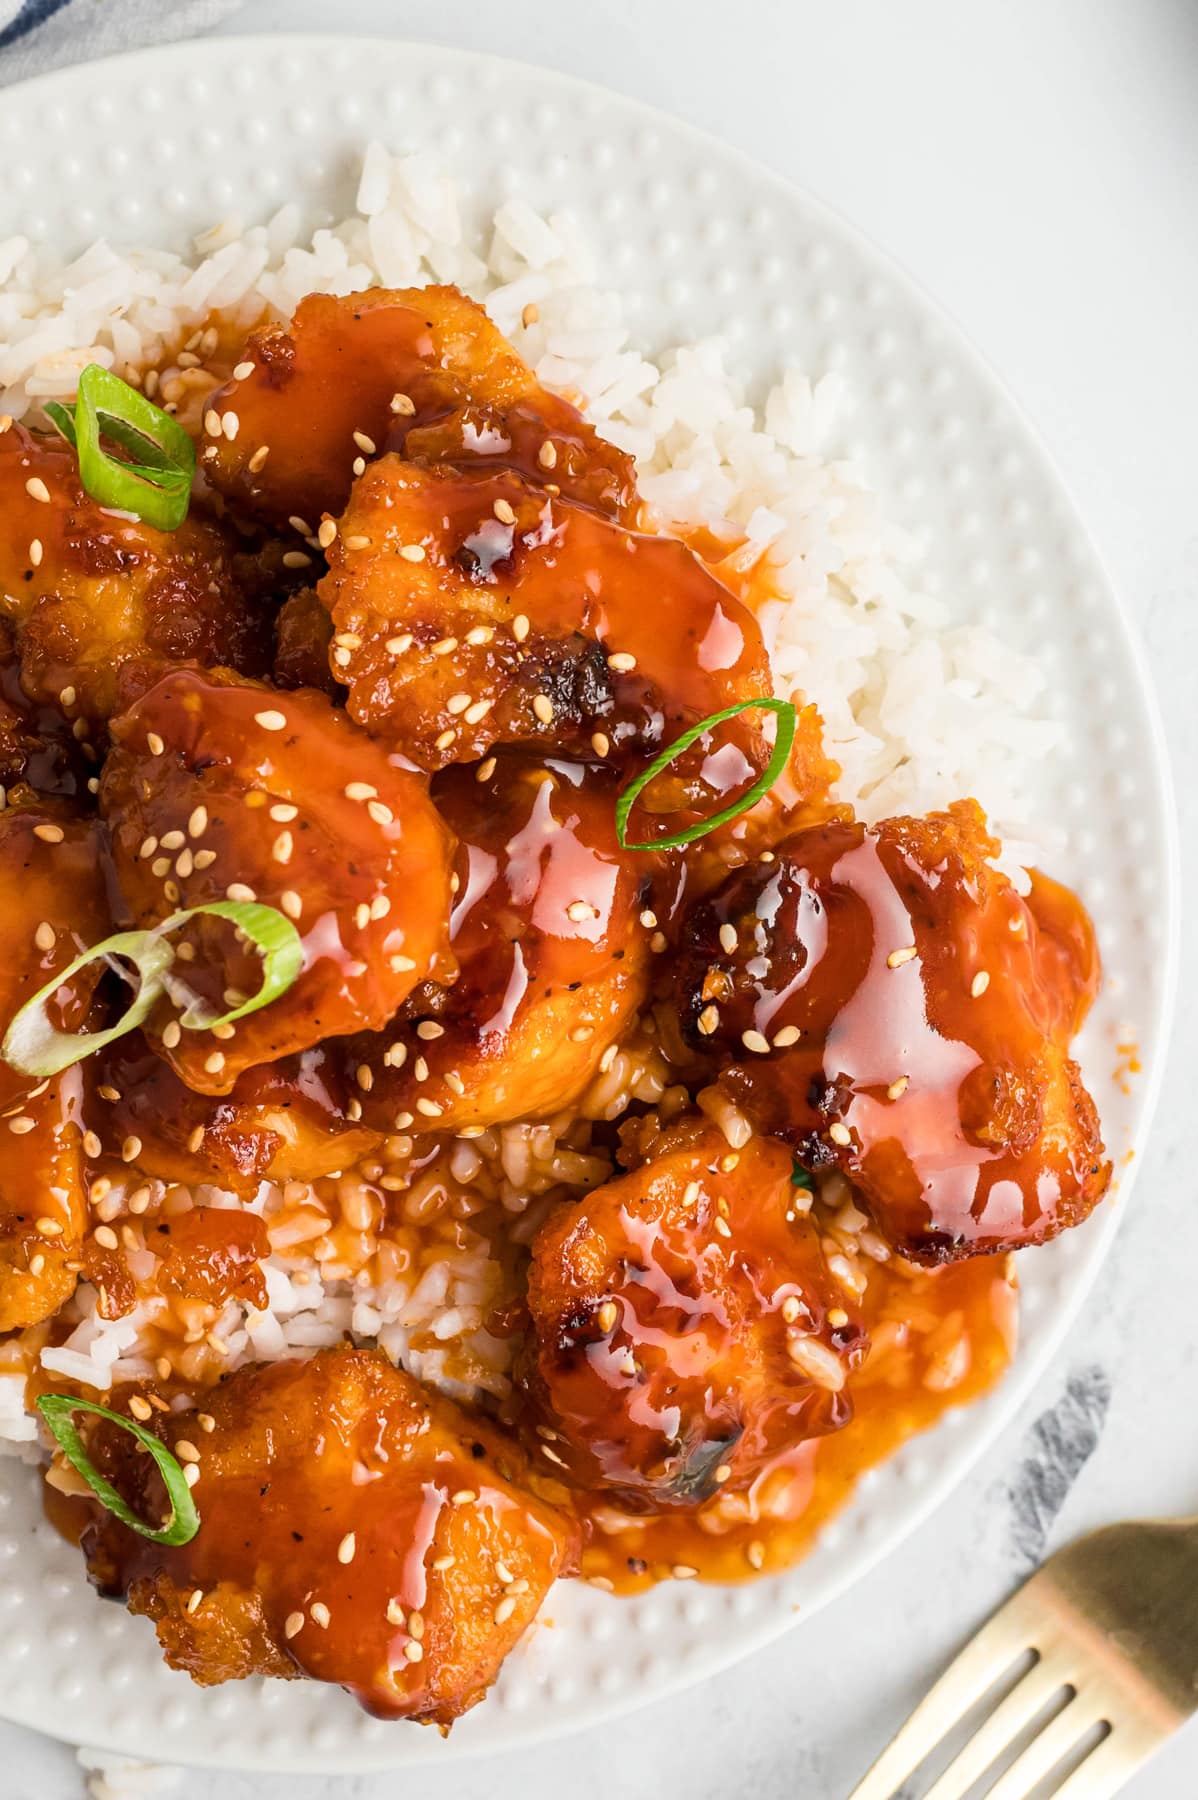 Overhead view of sweet and sour chicken over rice on a plate